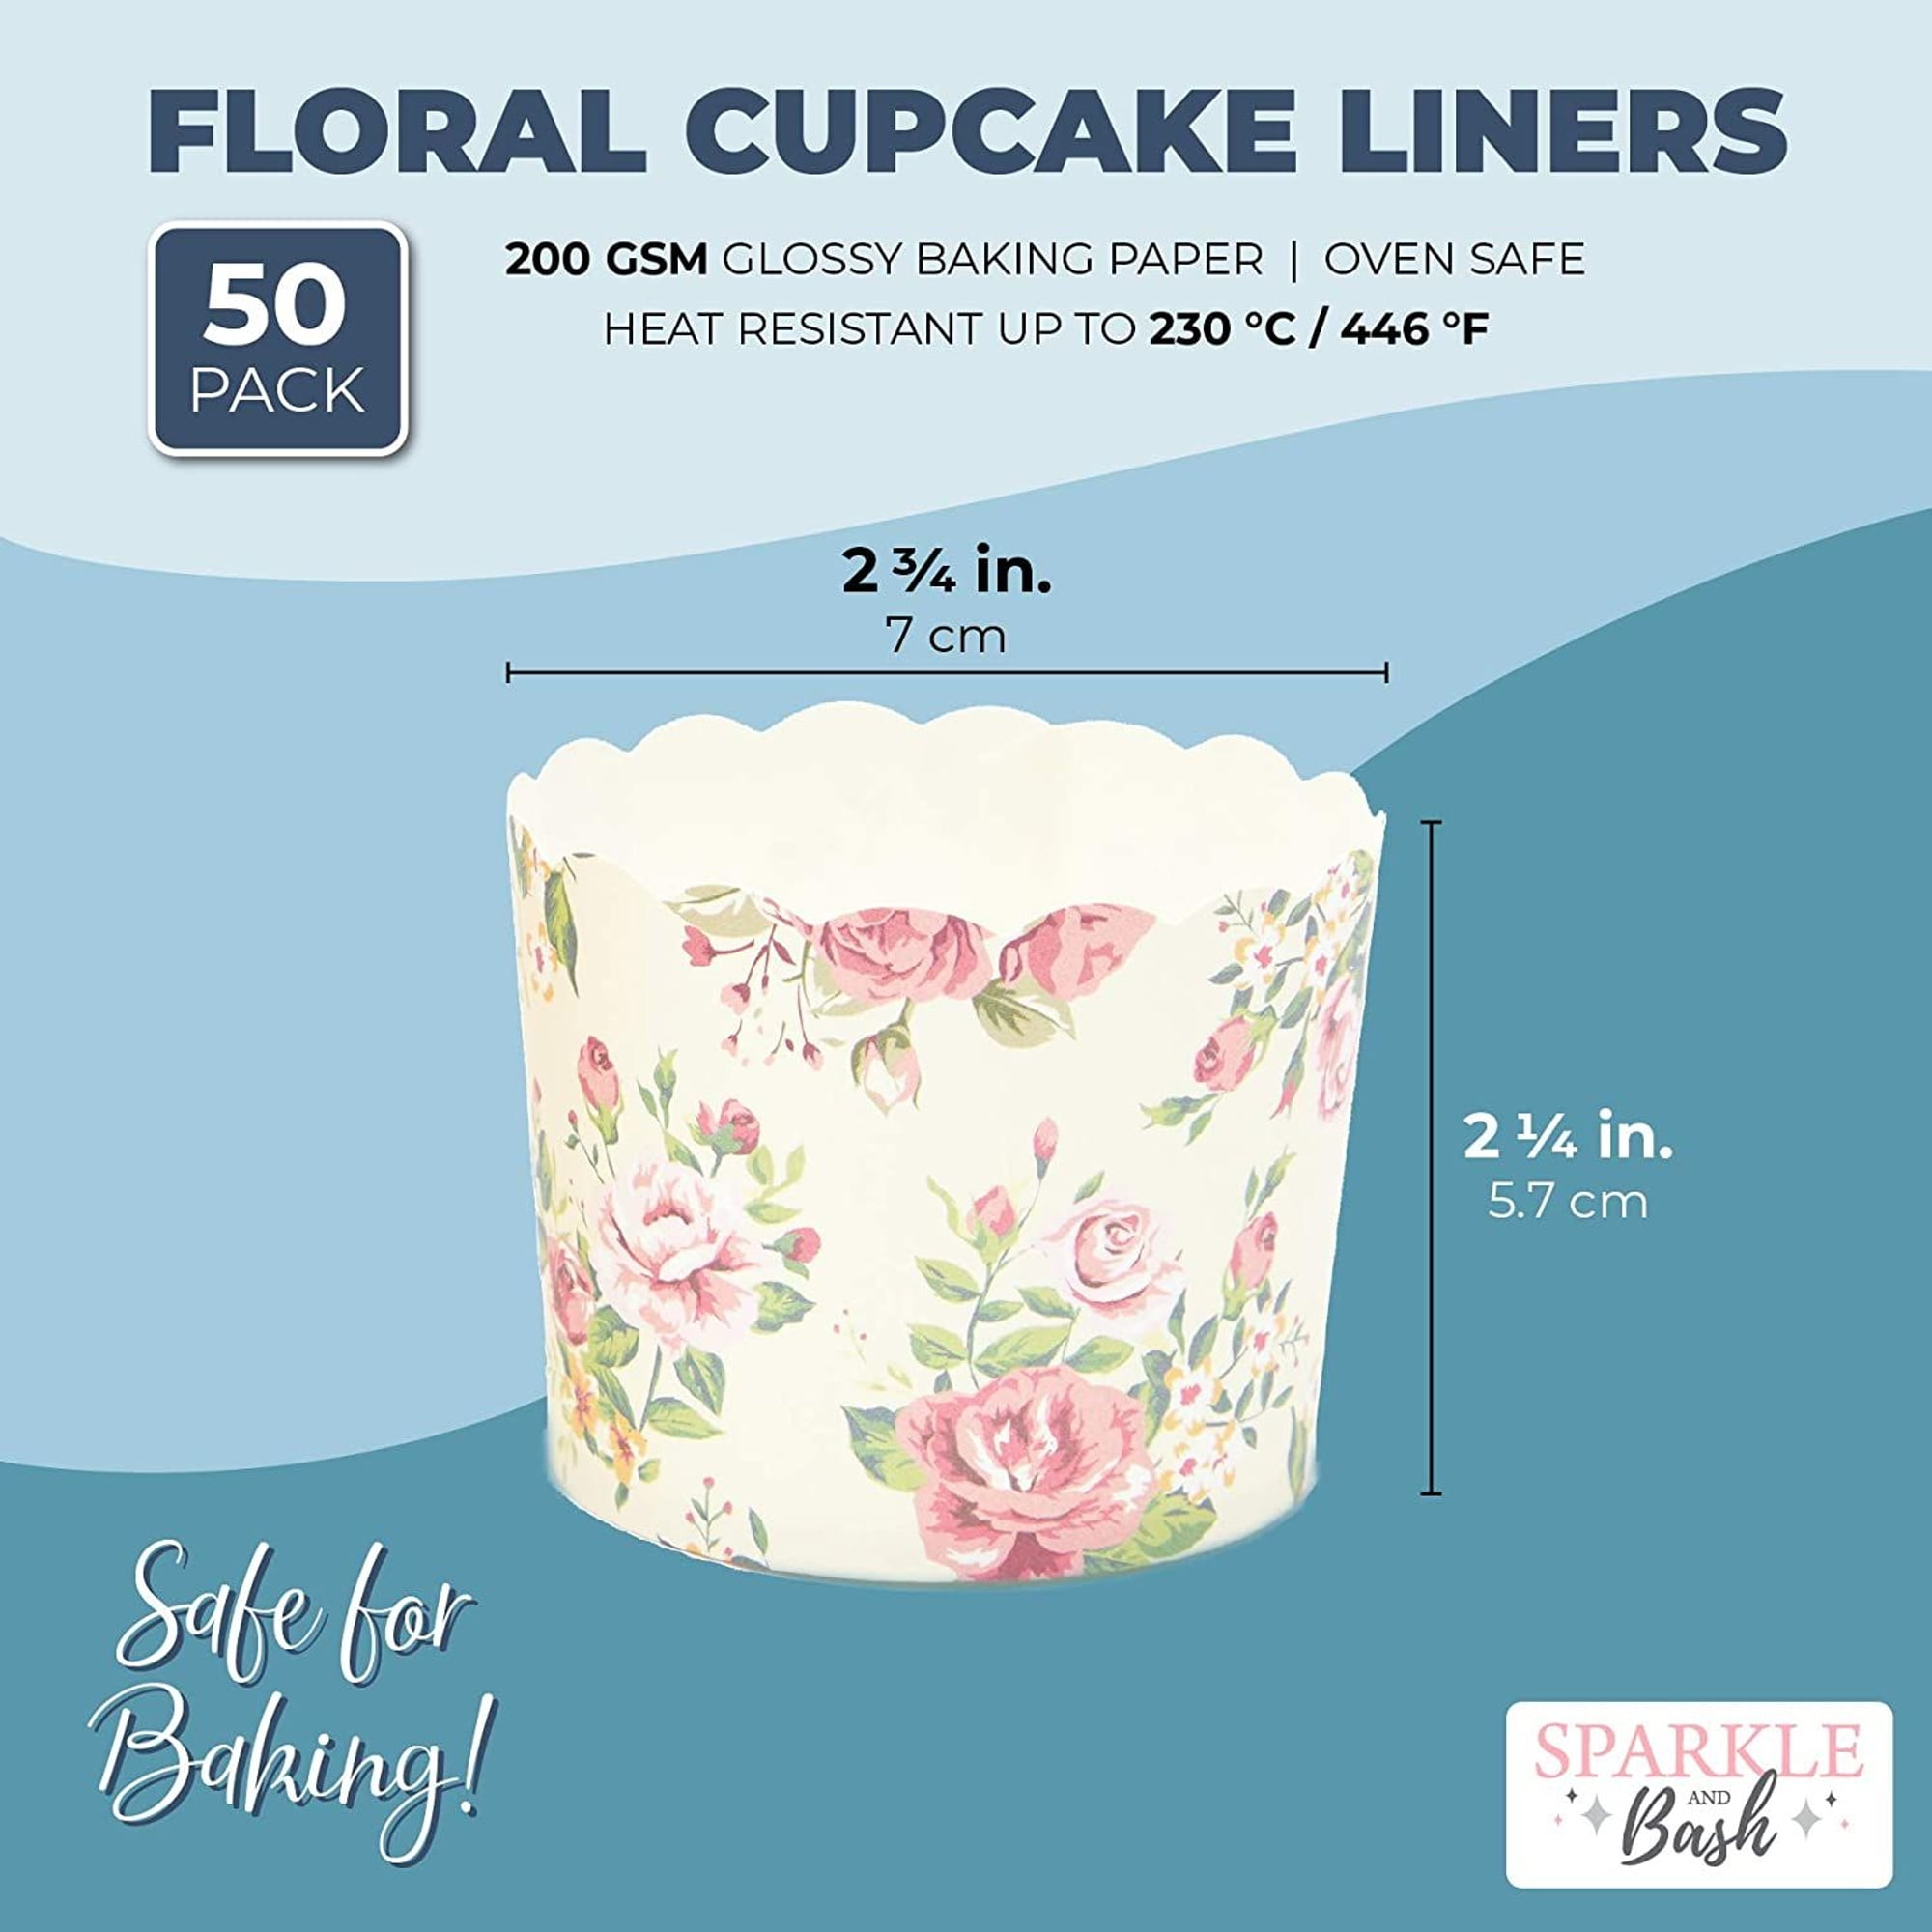 50pcs Newspaper Style Cupcake, Liner Baking Cup for Wedding Party, Tulip Muffin Cupcake Paper Cup,Oilproof Cake Wrapper,Cupcake Liner Baking Cup X1h8